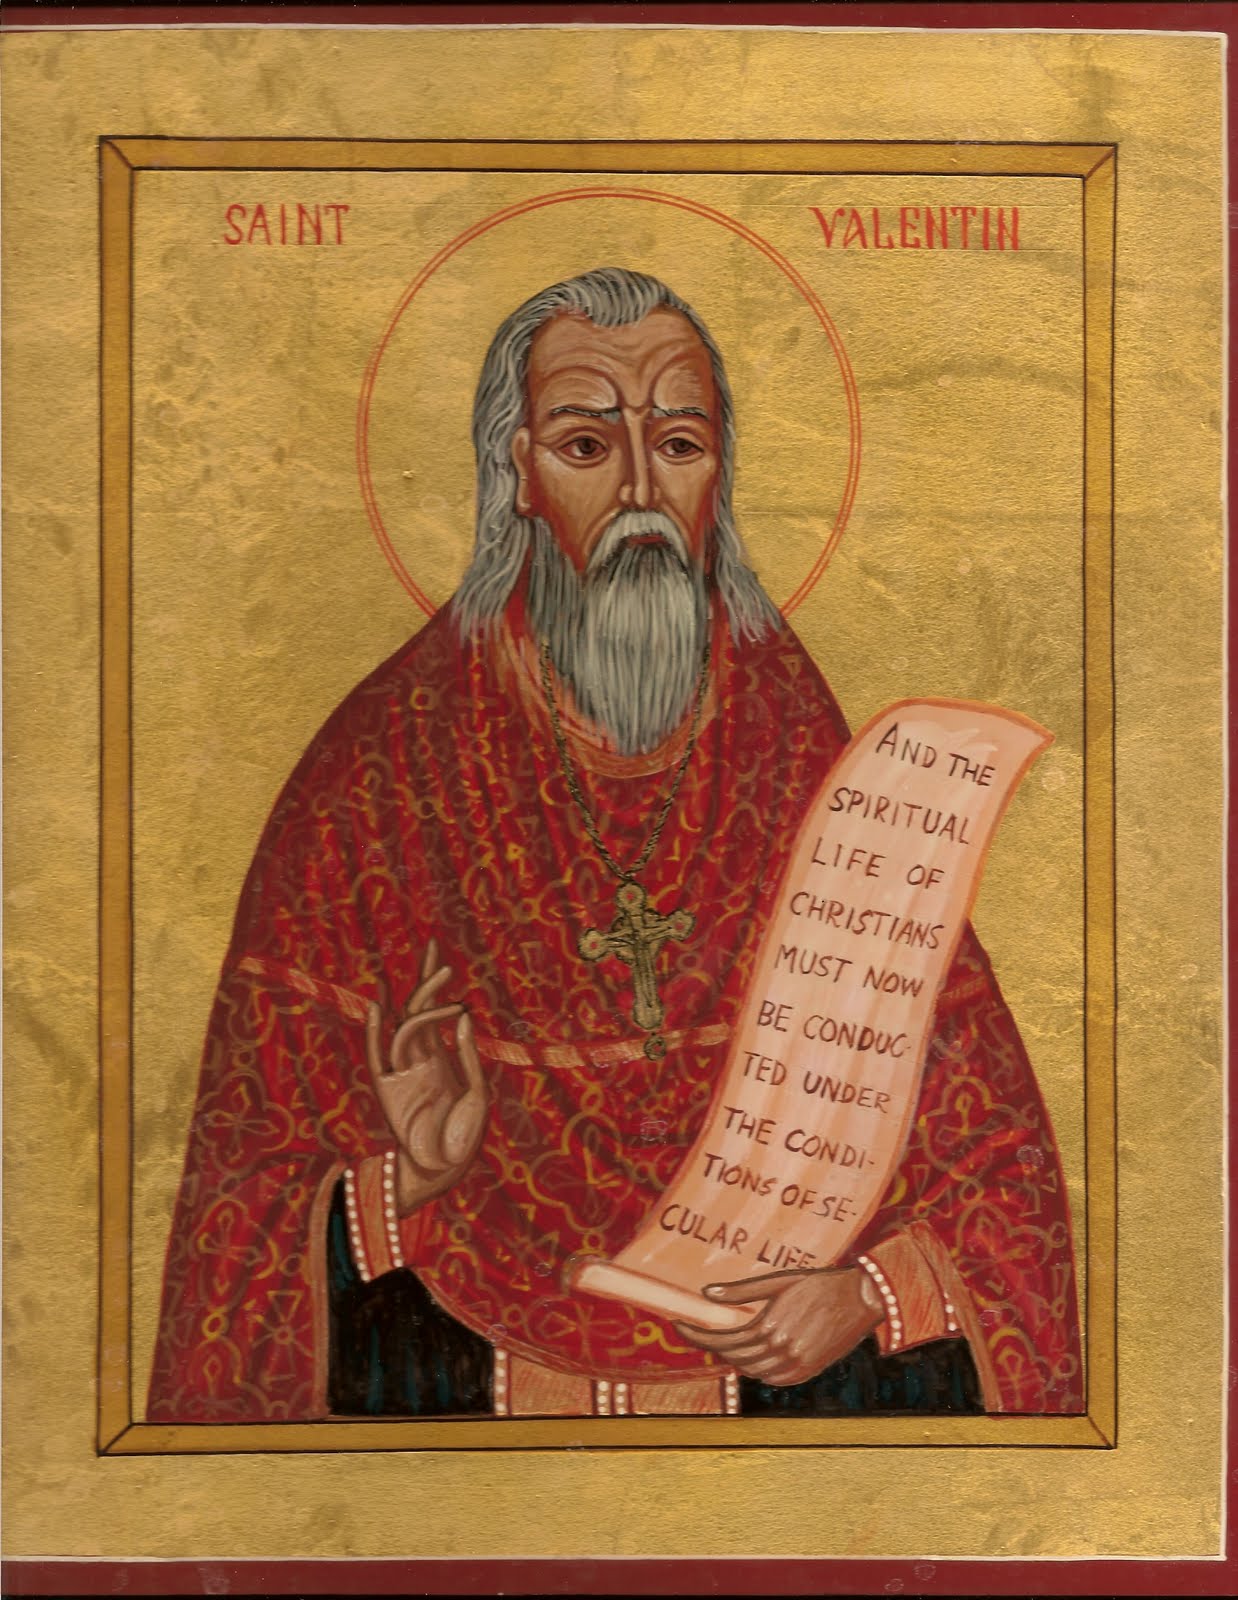 Saint Valentine: How Love’s Martyr Came to Dublin at http://www.headstuff.org/2016/07/st-valentine-man-myth-martyr/